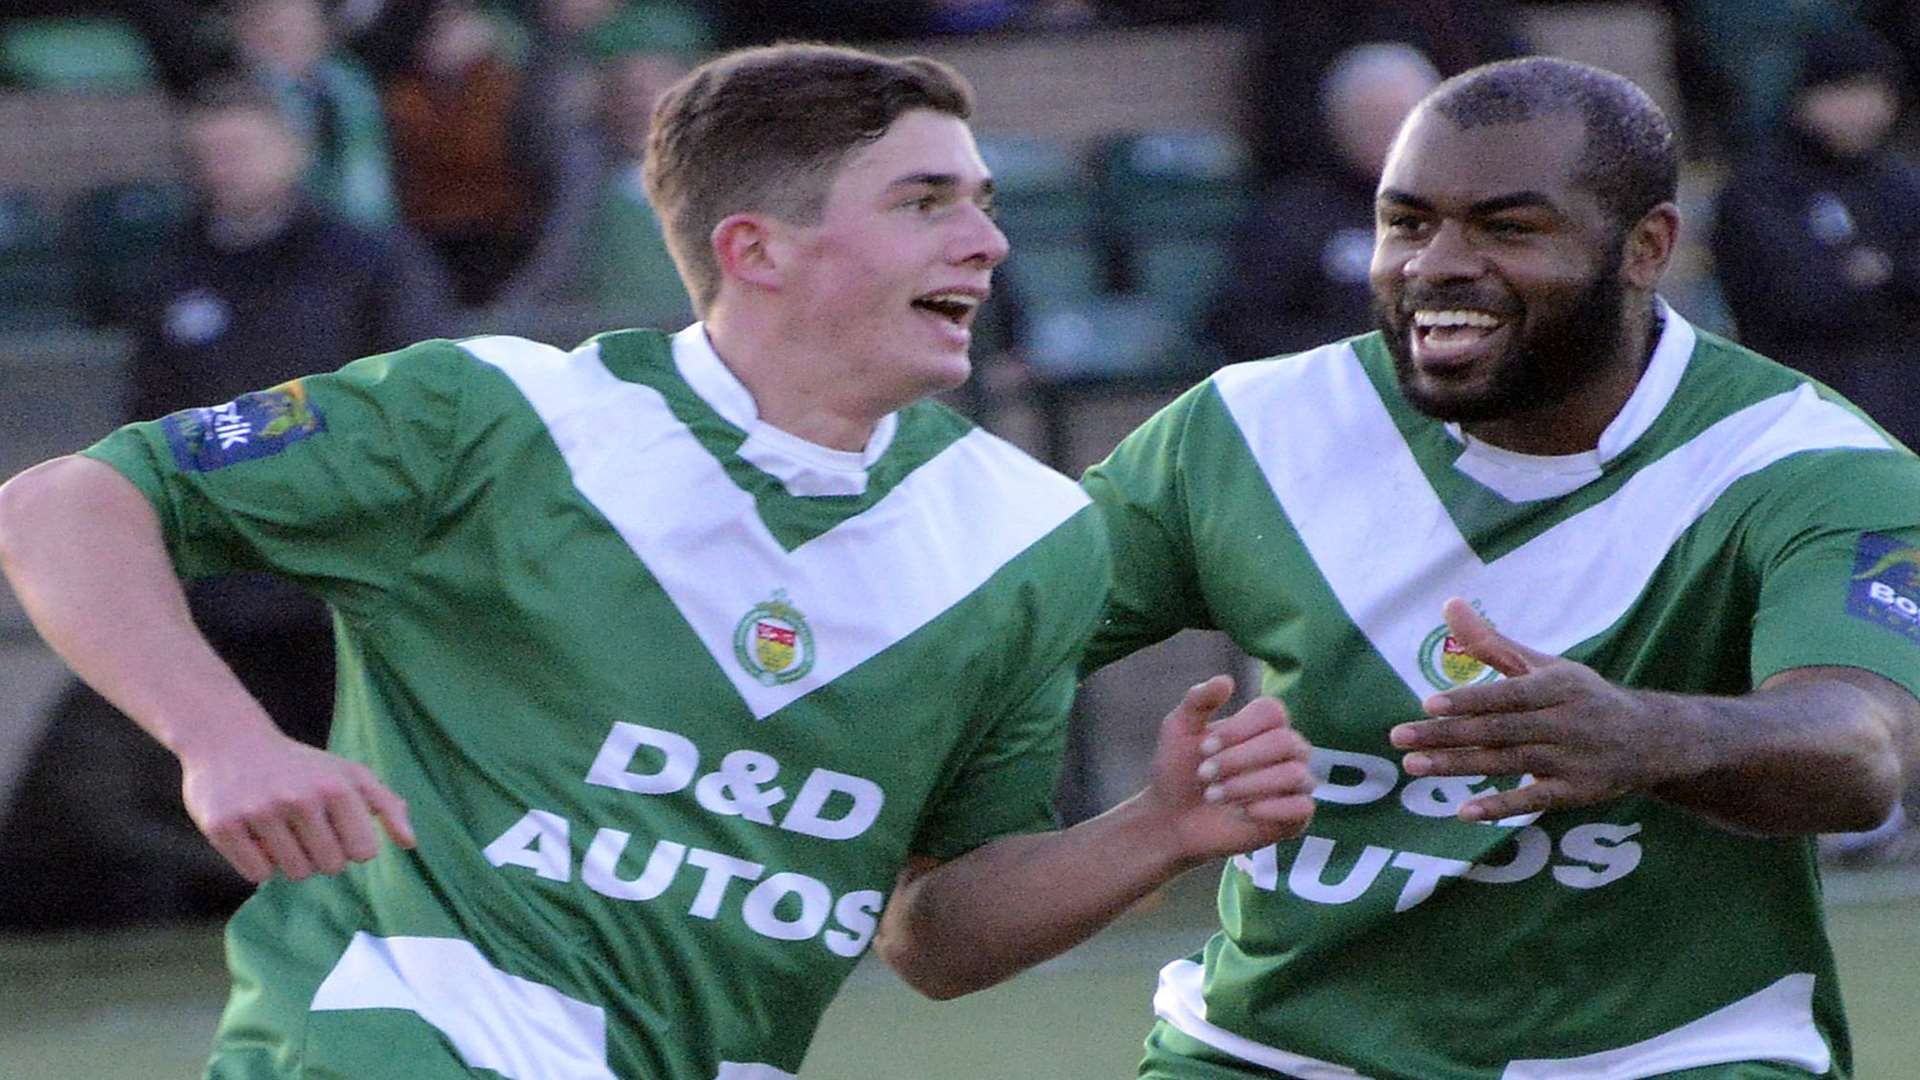 Max Watters, left, celebrates one of his goals against Thamesmead with Andrew Dalhouse Picture: Paul Amos